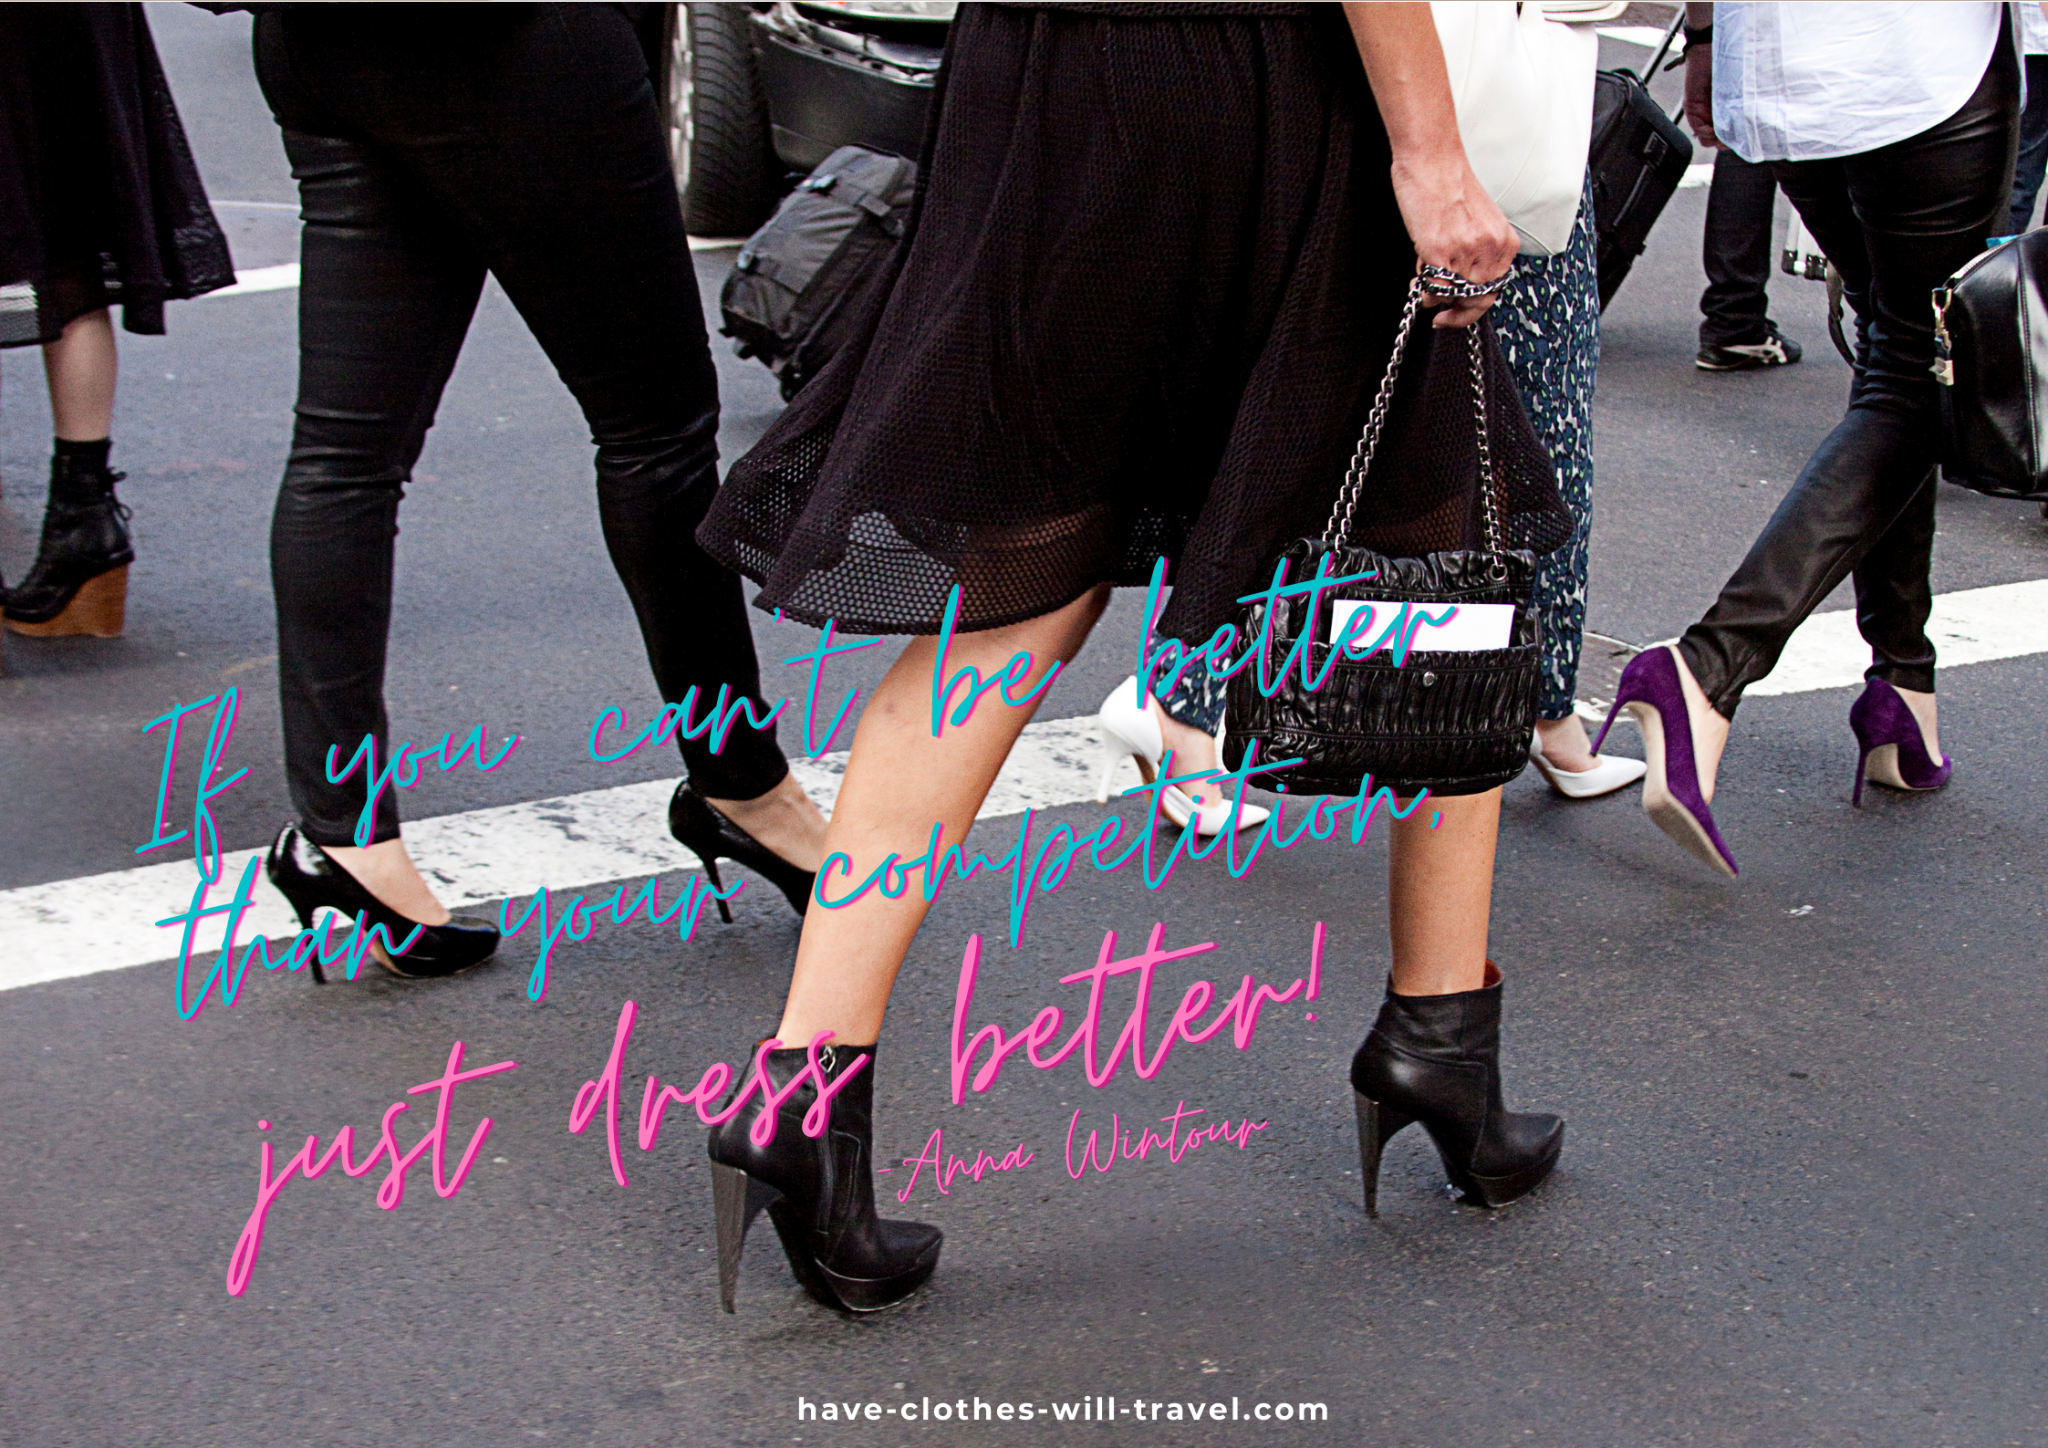 An image shows woman walking across the street in a crosswalk, all wearing black high heels. Blue and pink text across the image says, "If you can’t be better than your competition, just dress better. – Anna Wintour"